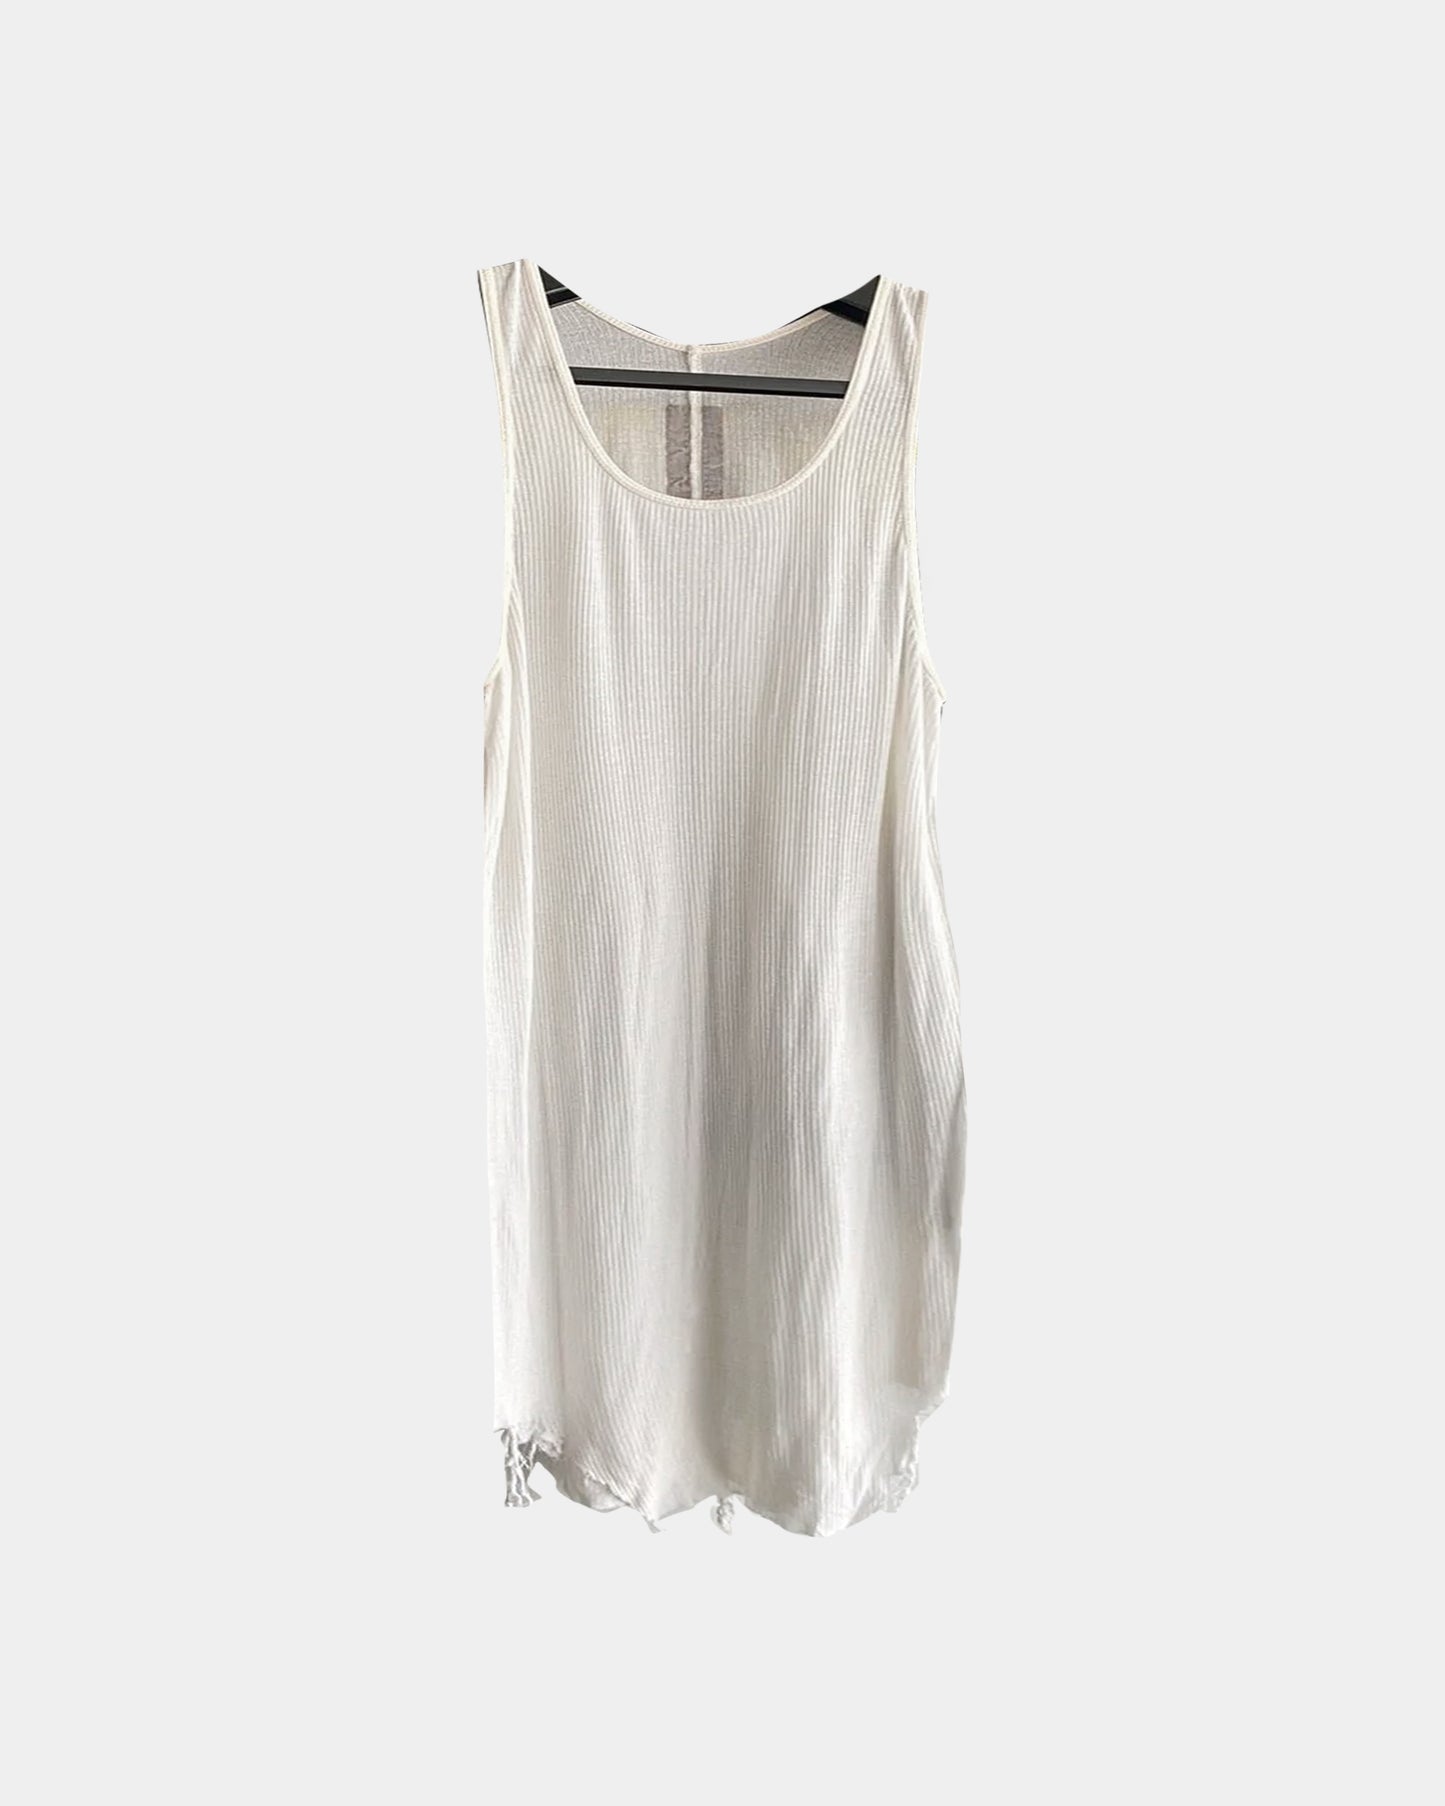 Rick Owens ONE SIZE FIT Semi Sheer STRETCHY Tank Top Shirt